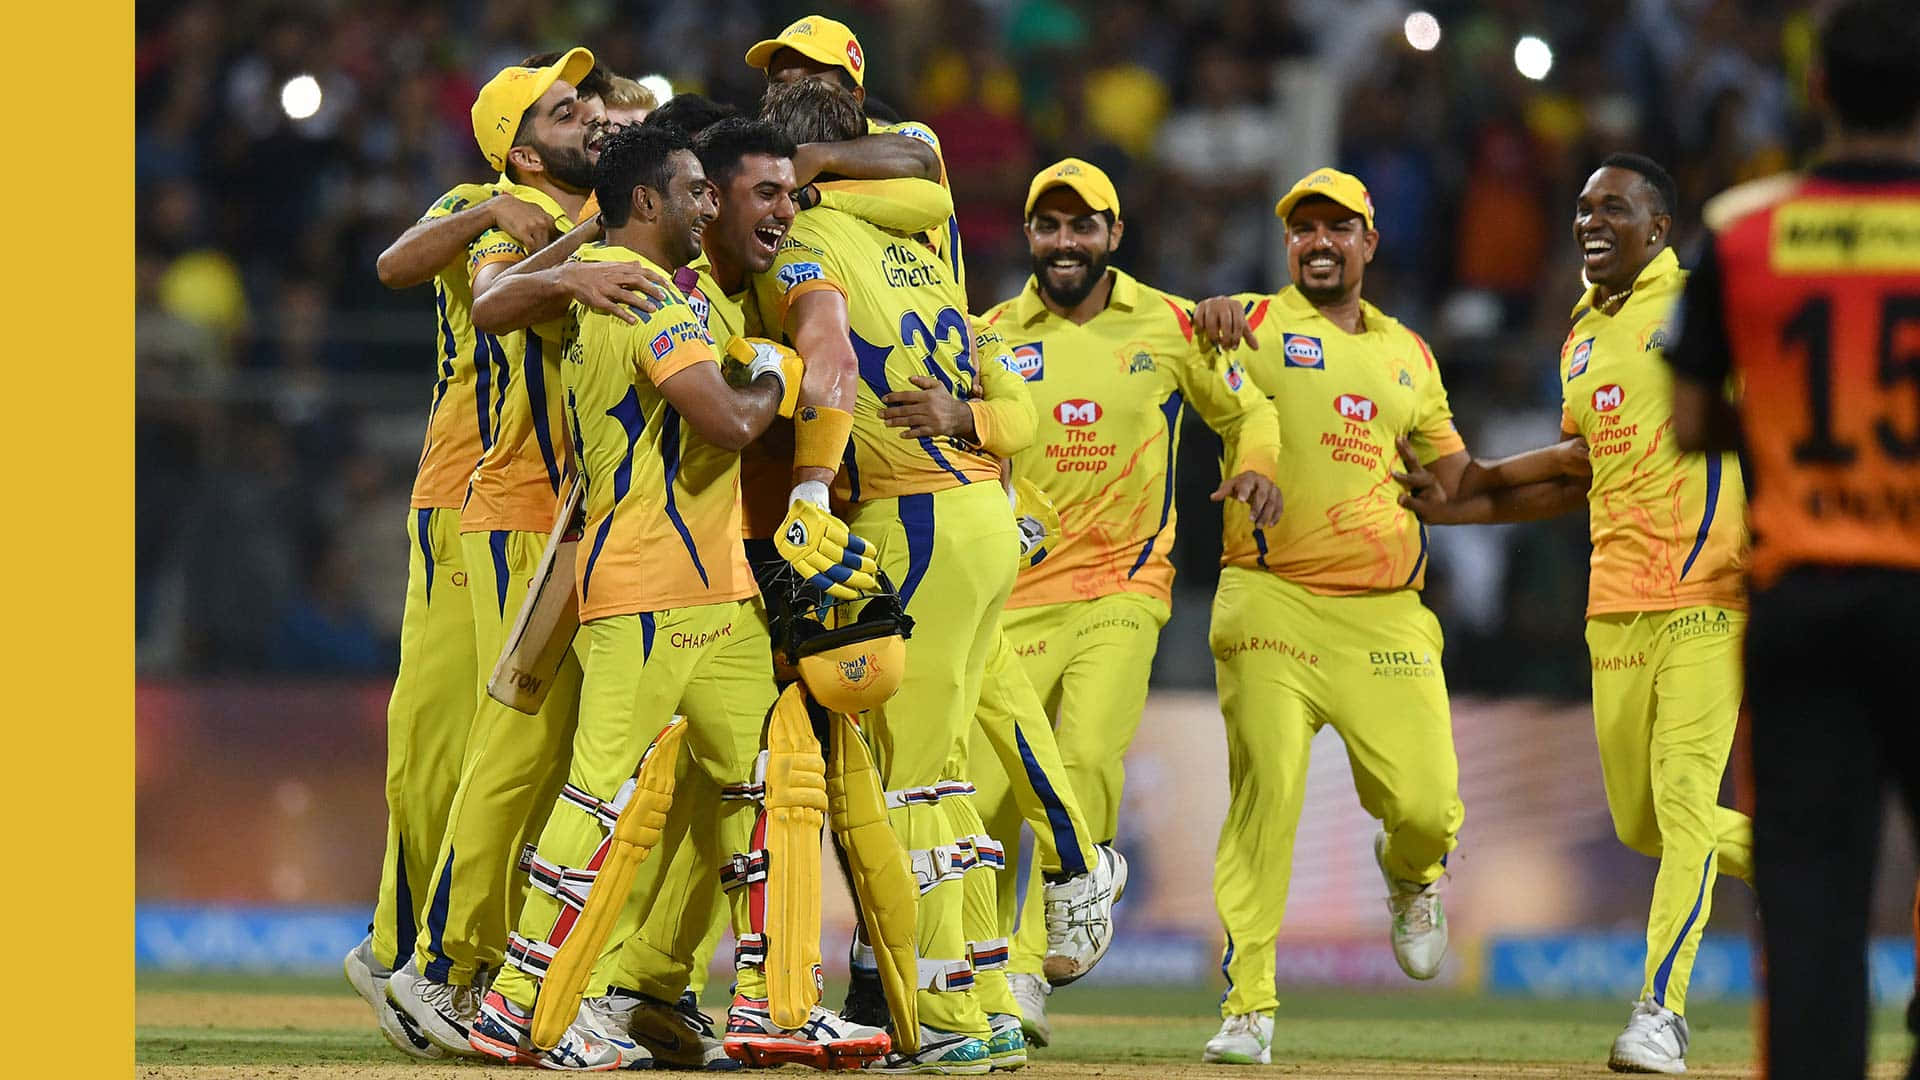 Chennai Super Kings team celebrating victory on the field